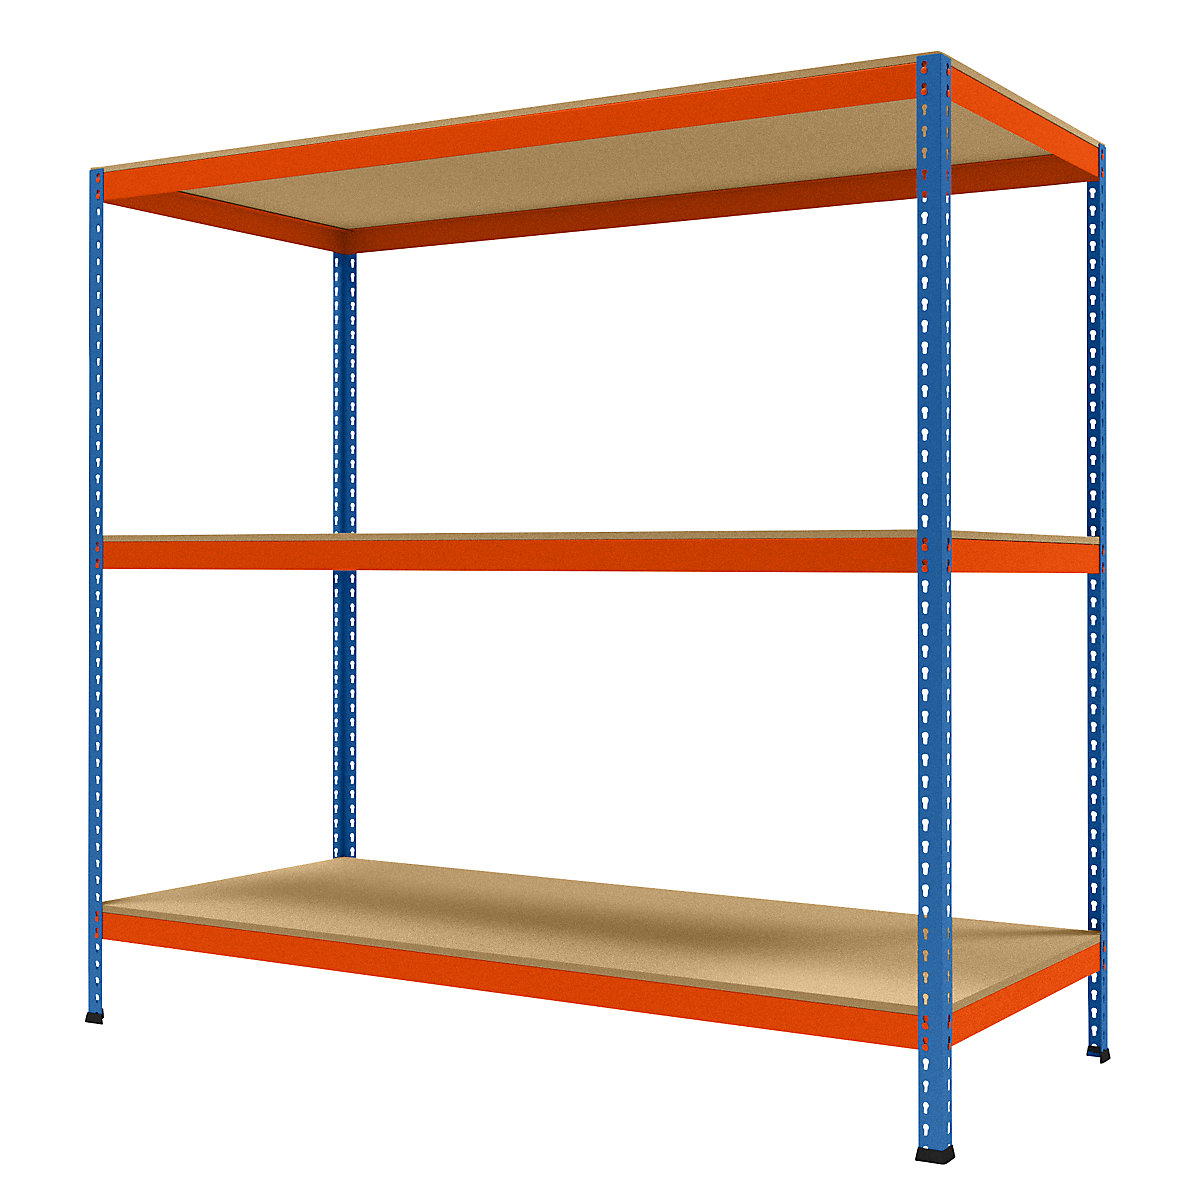 Wide span heavy duty shelving, height 1981 mm, overall depth 926 mm, width 2146 mm